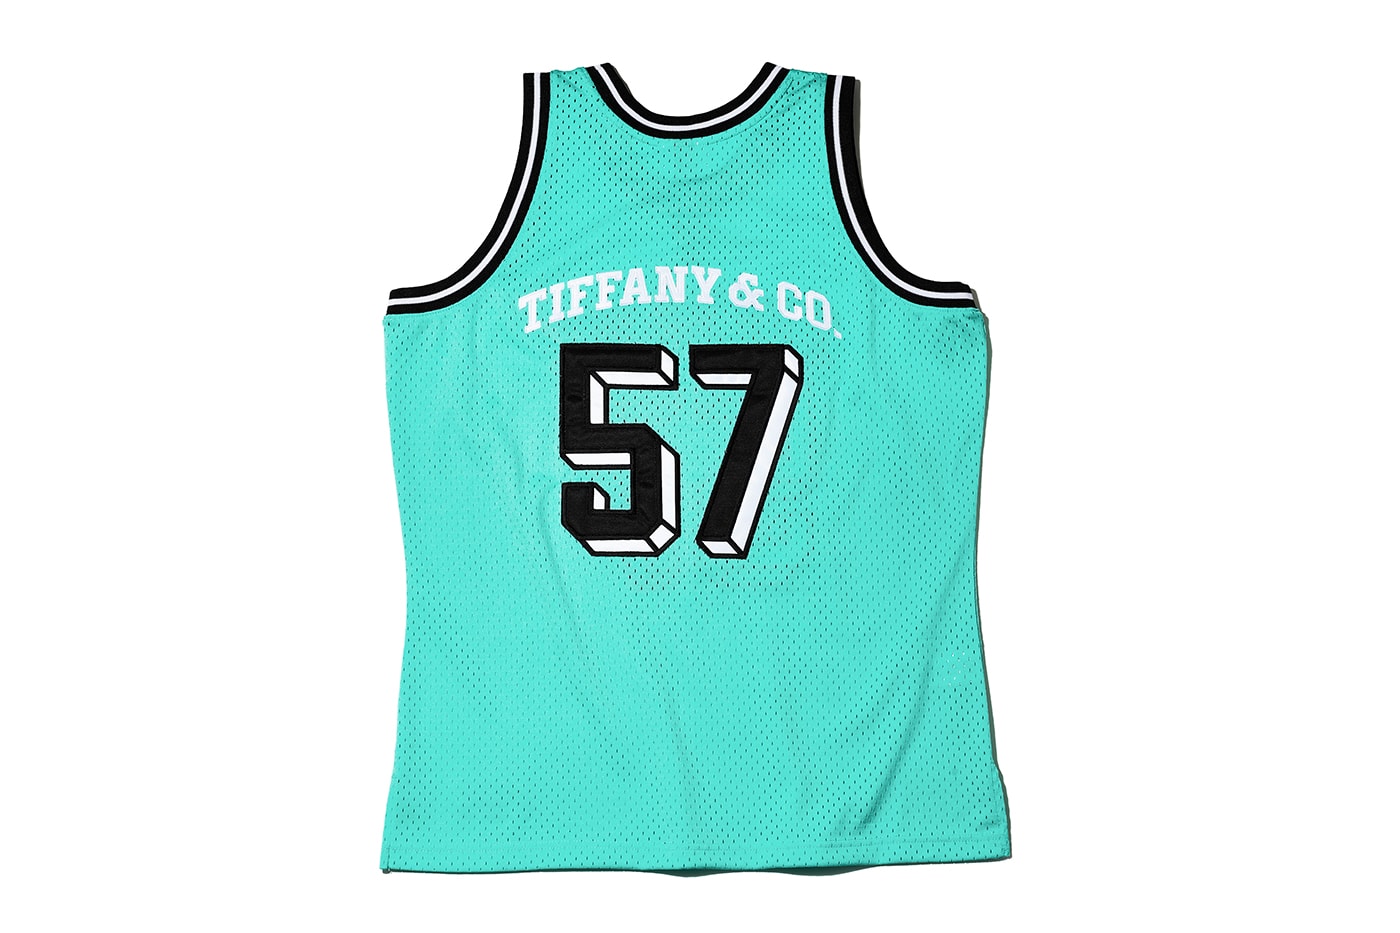 Tiffany & Co. x Mitchell & Ness/Spalding Release